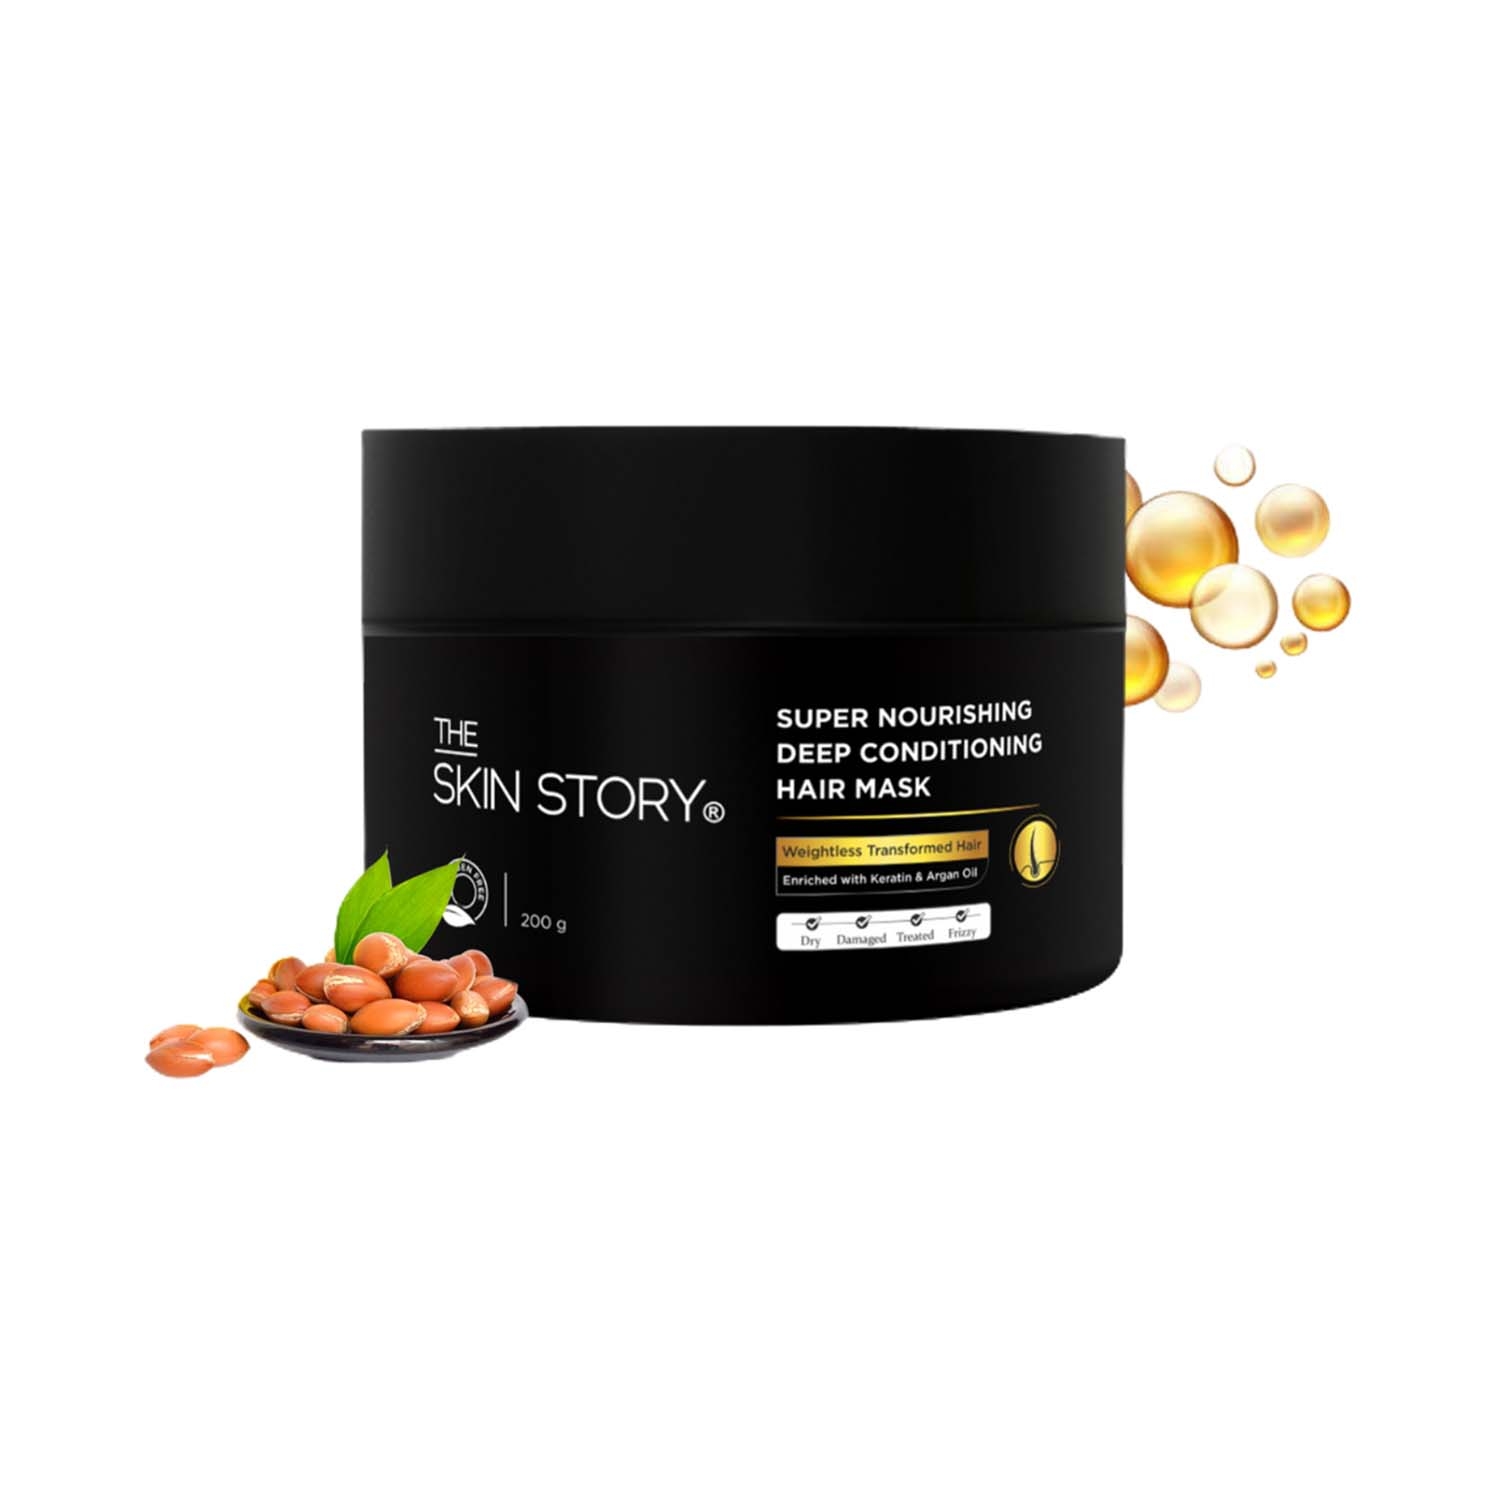 The Skin Story | The Skin Story Super Nourishing Deep Conditioning Hair Mask (200g)